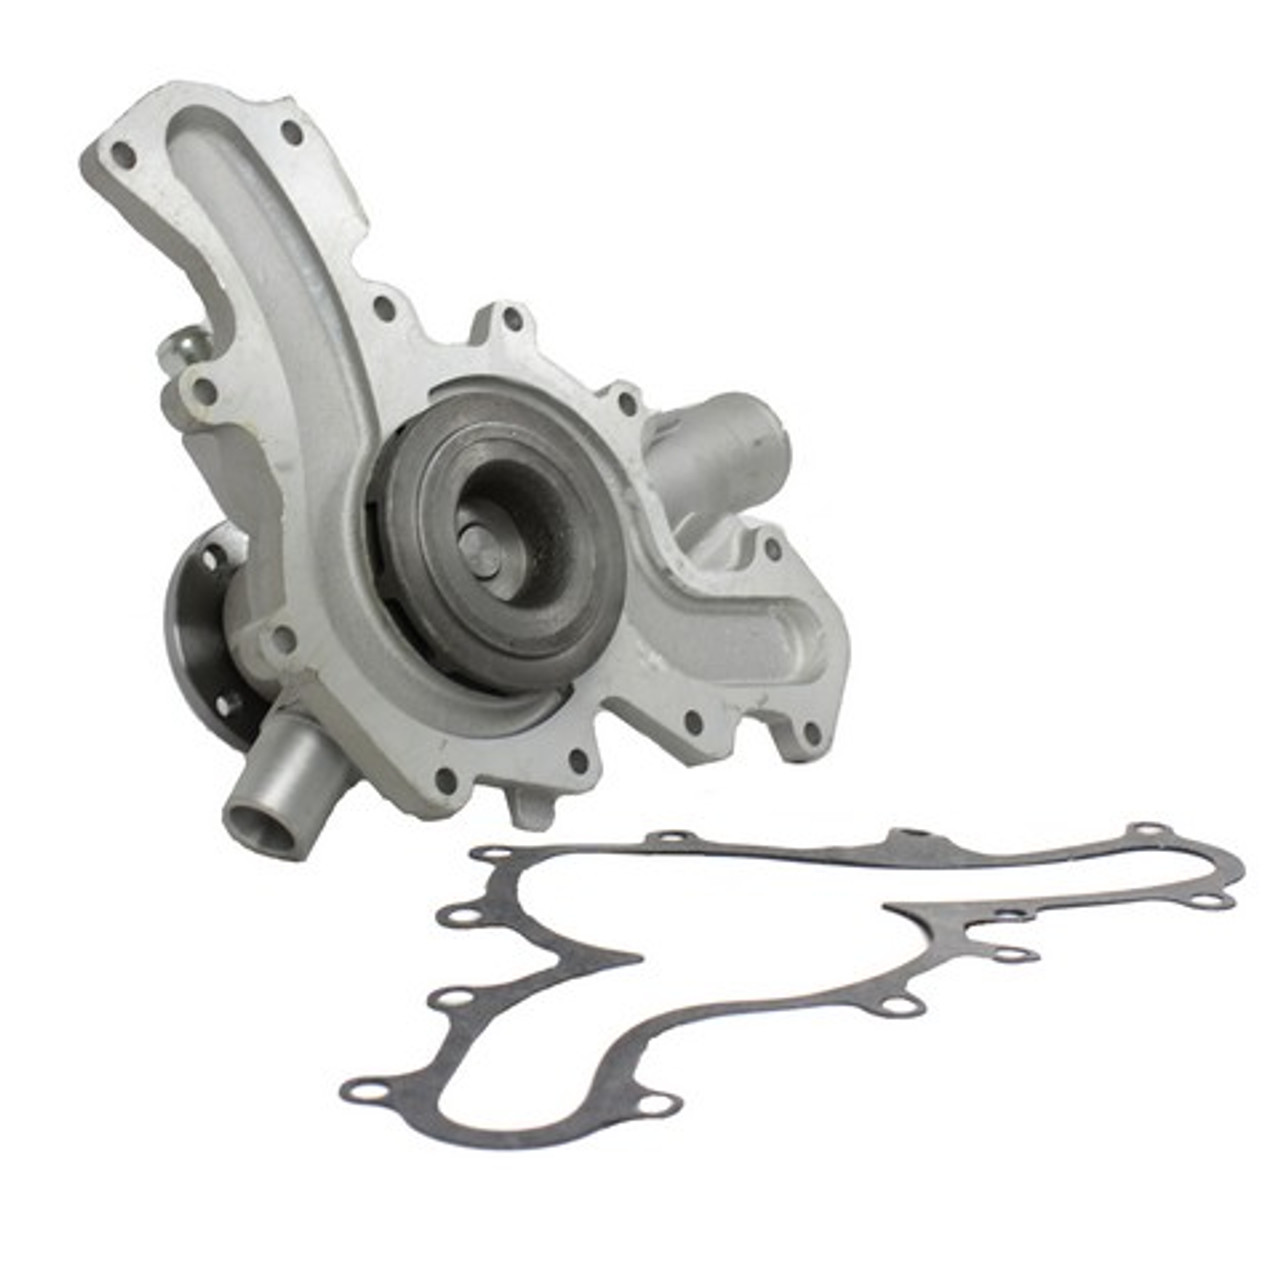 Water Pump 4.0L 2007 Ford Mustang - WP4028.25